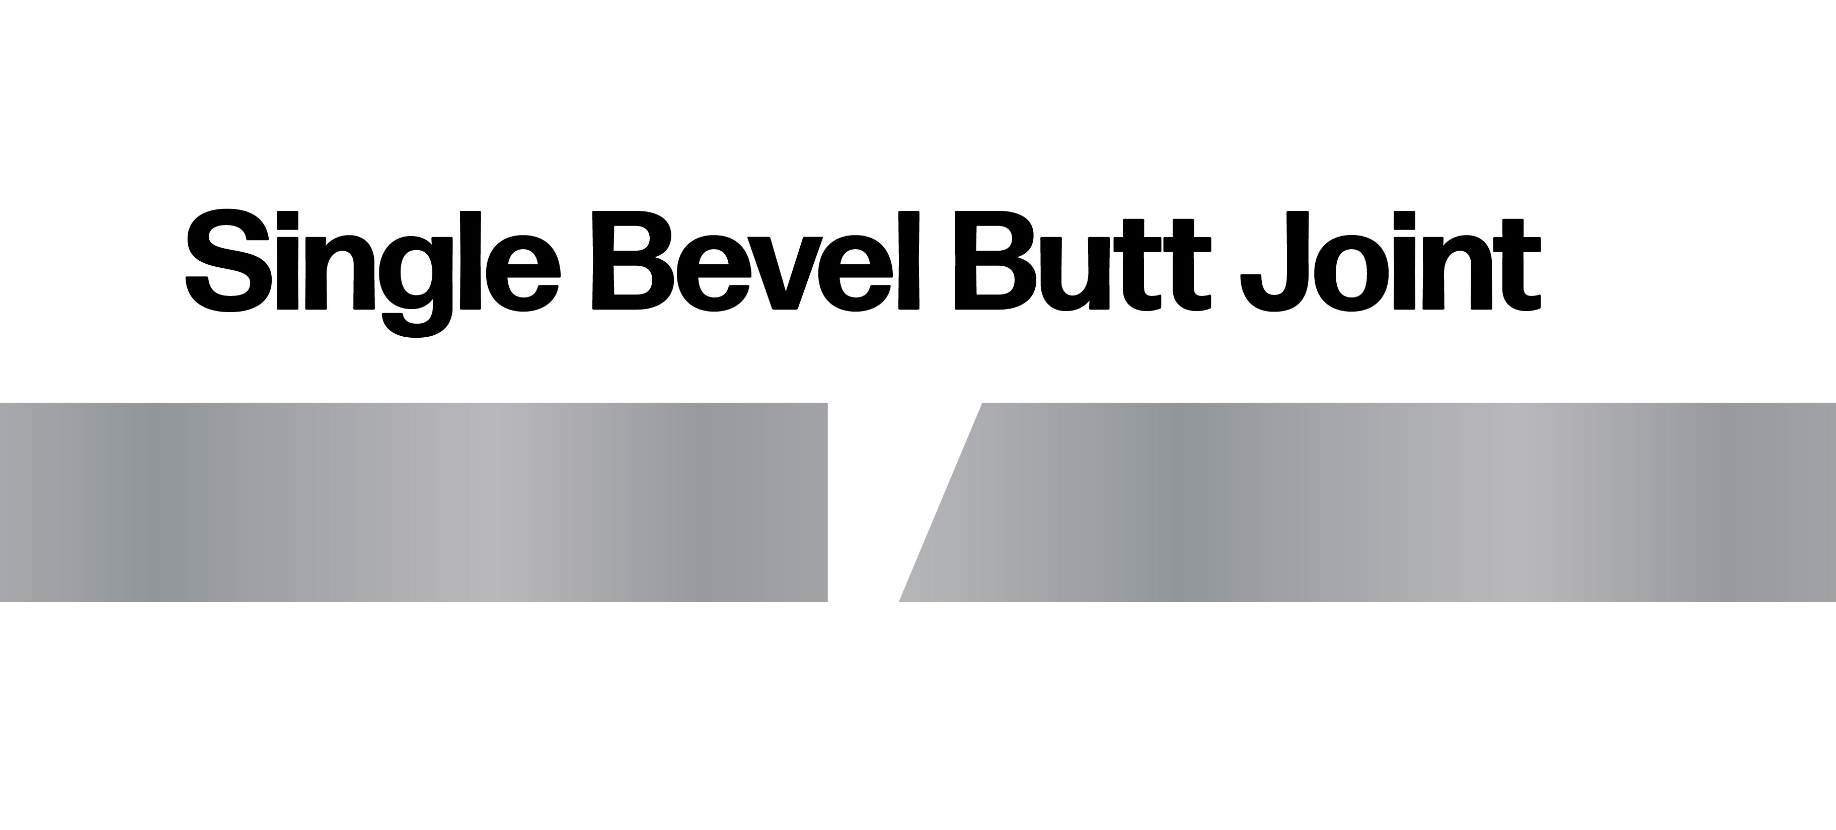 Single Bevel Butt Joint Graphic